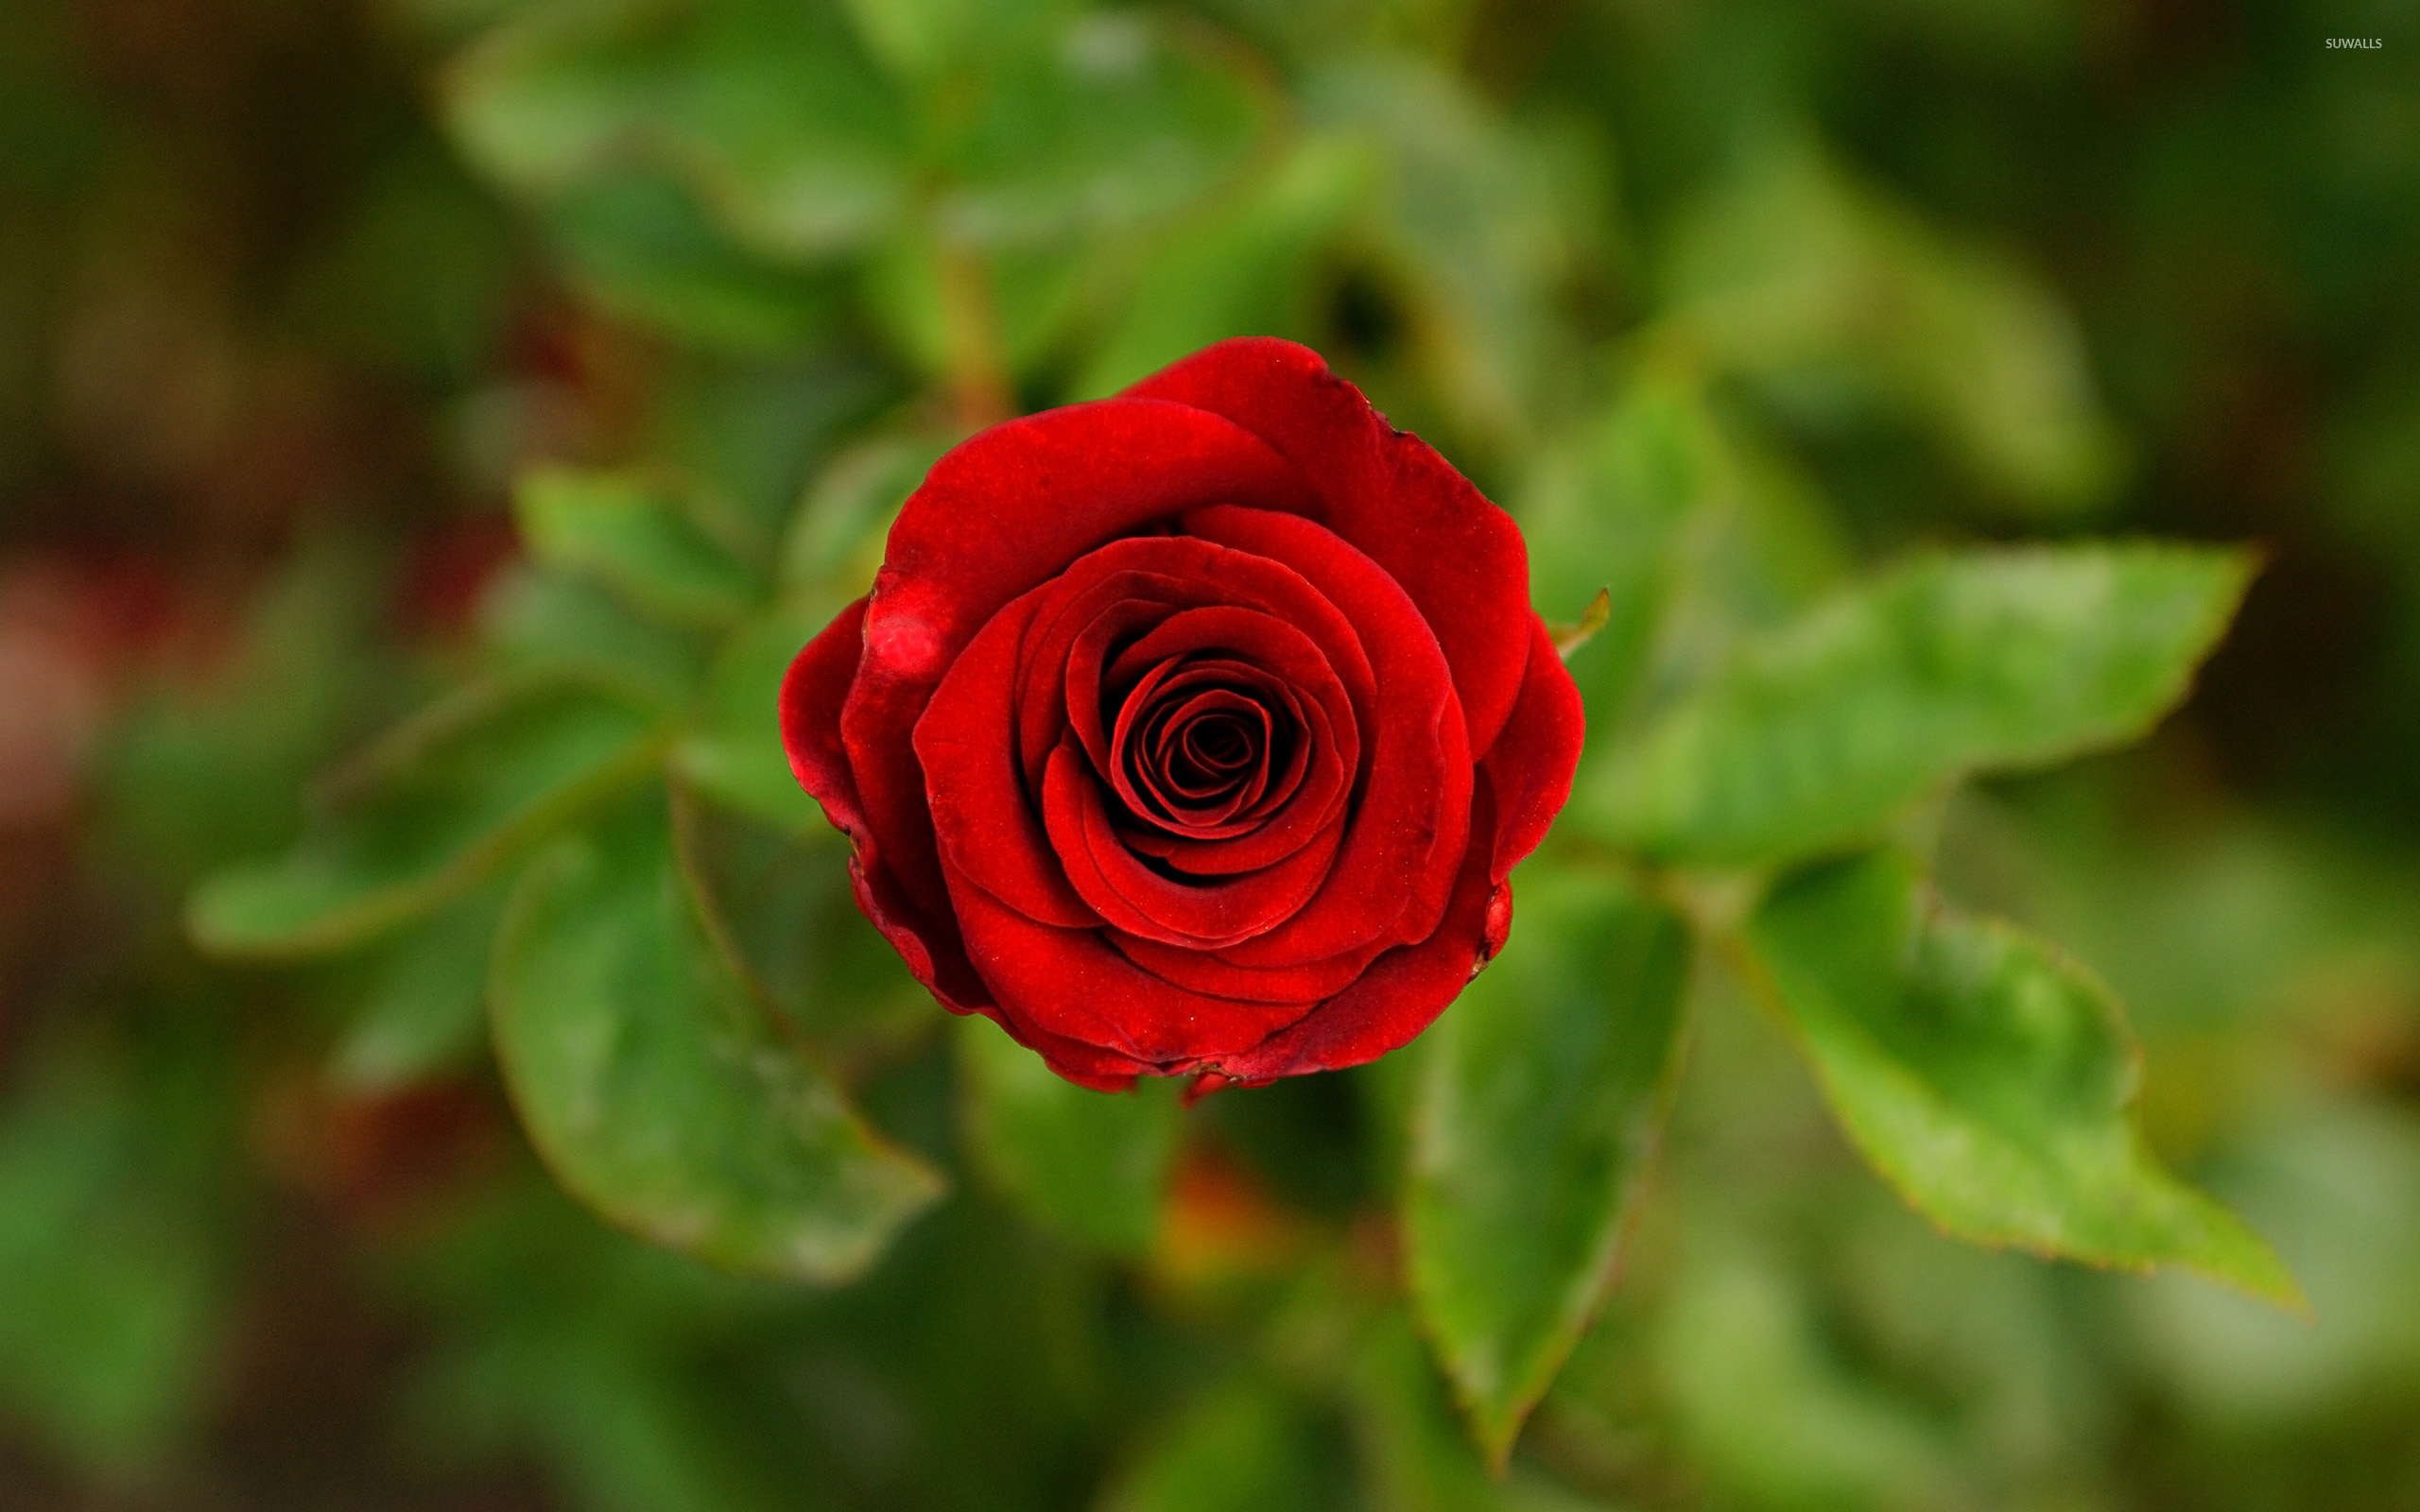 Flowers Red Rose 2 wallpapers (Desktop, Phone, Tablet) - Awesome ...